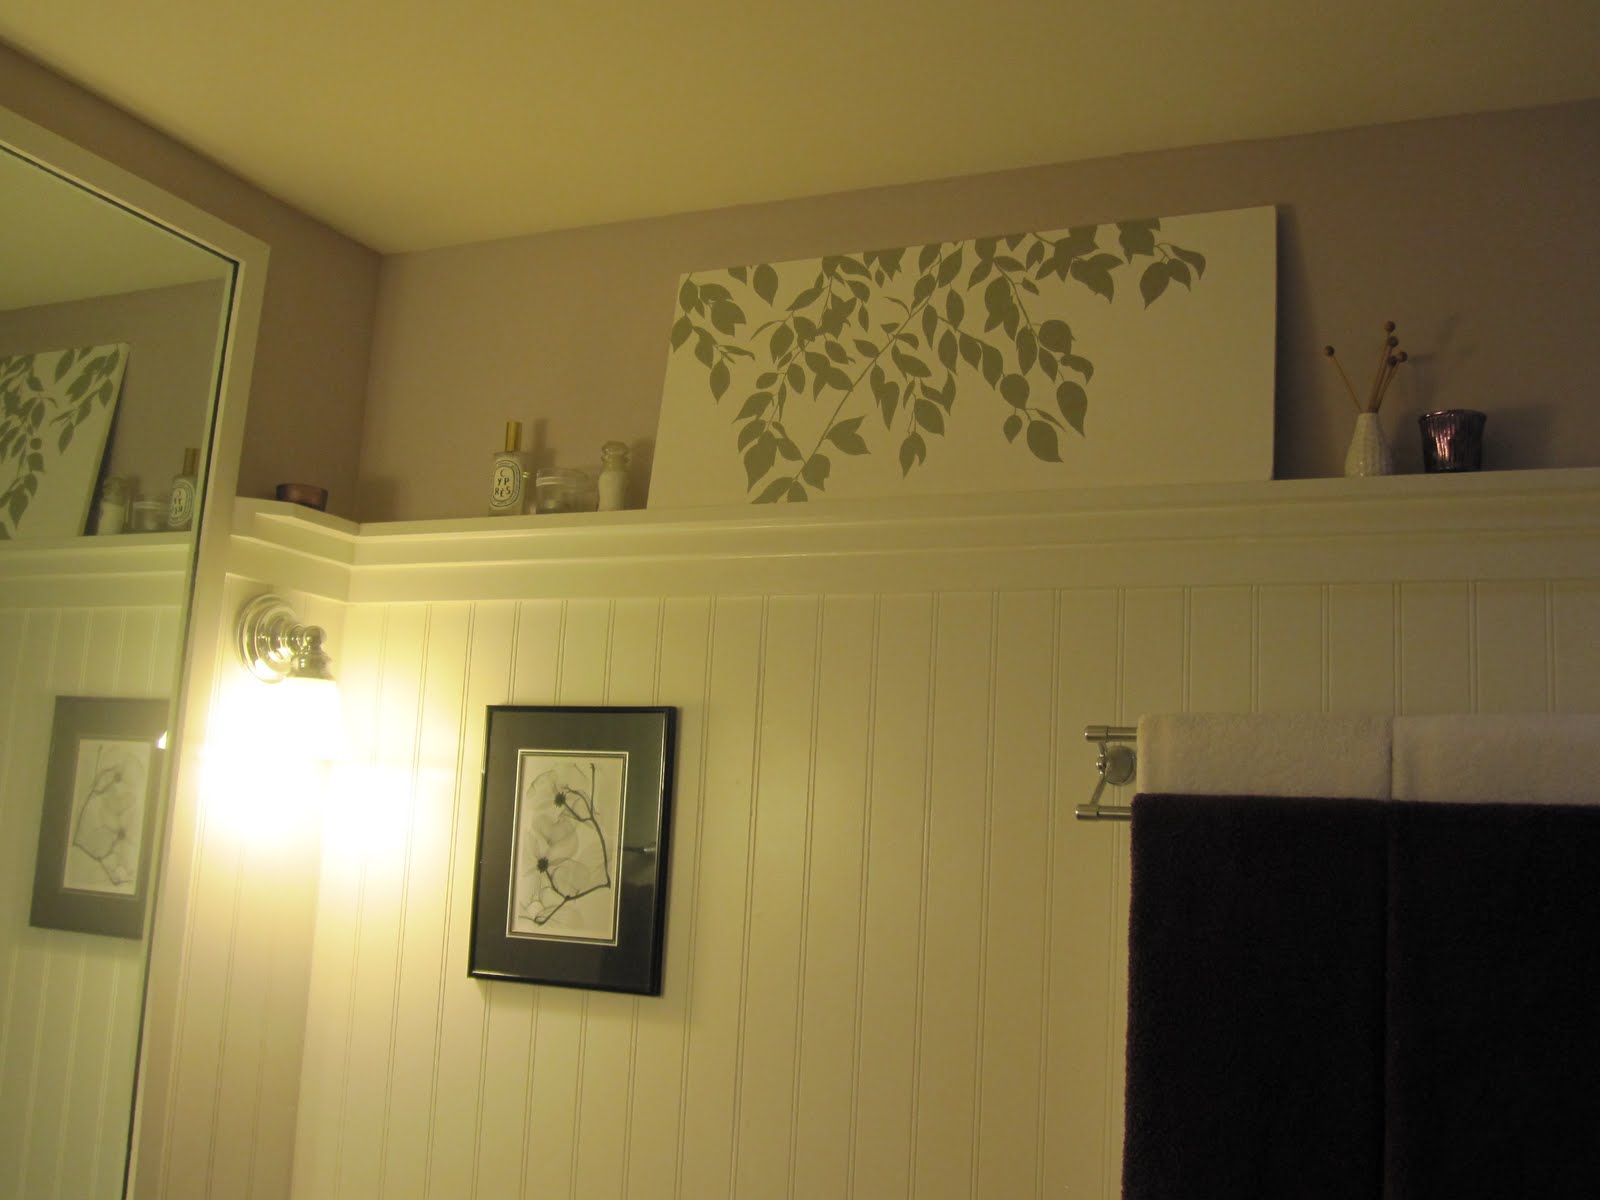 ... wallpaper in the existing bathroom wasn t installed correctly so when